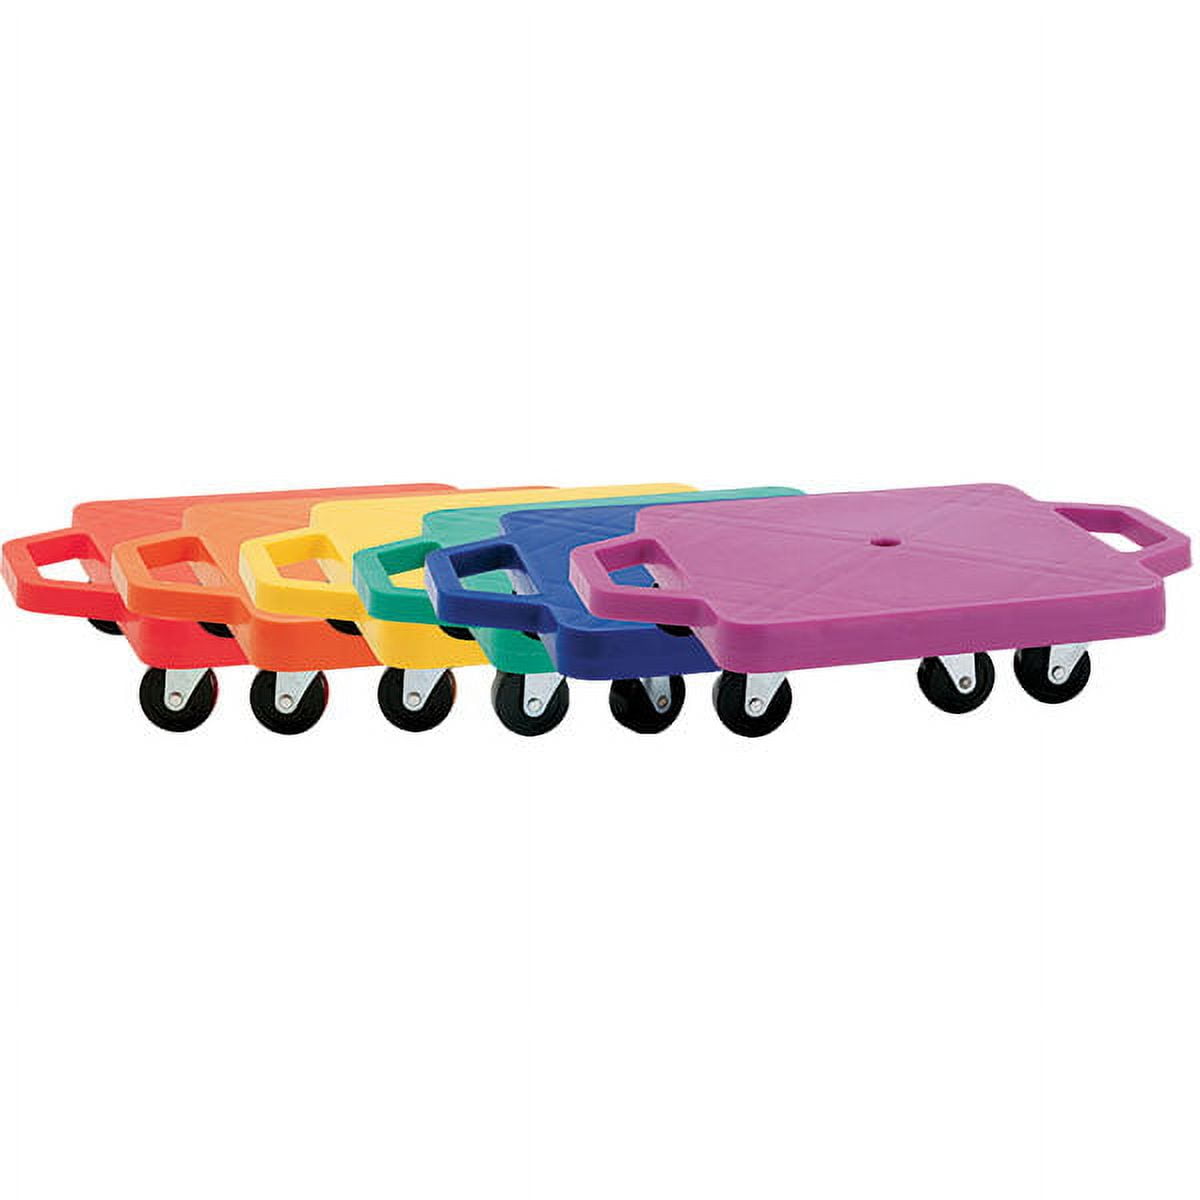 Picture of Champion Sports 21325 12 in. Heavy Duty Scooters with Safety Handles in 6 colors